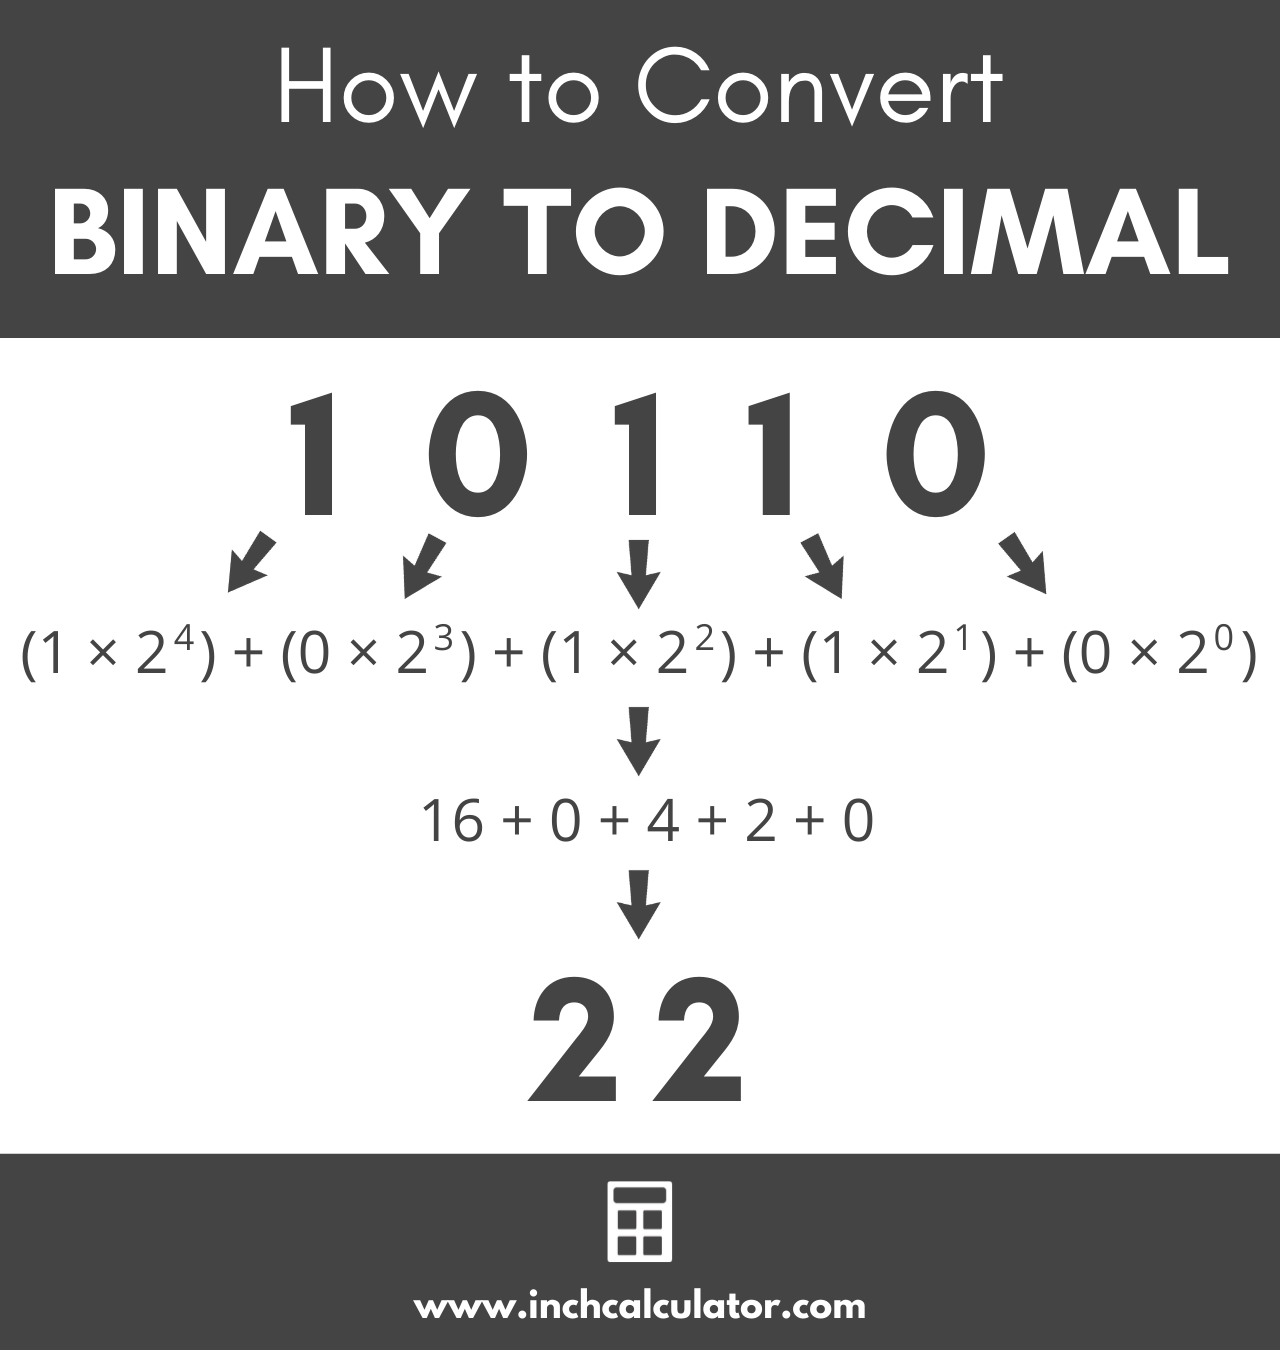 graphic showing how to convert a binary number to decimal